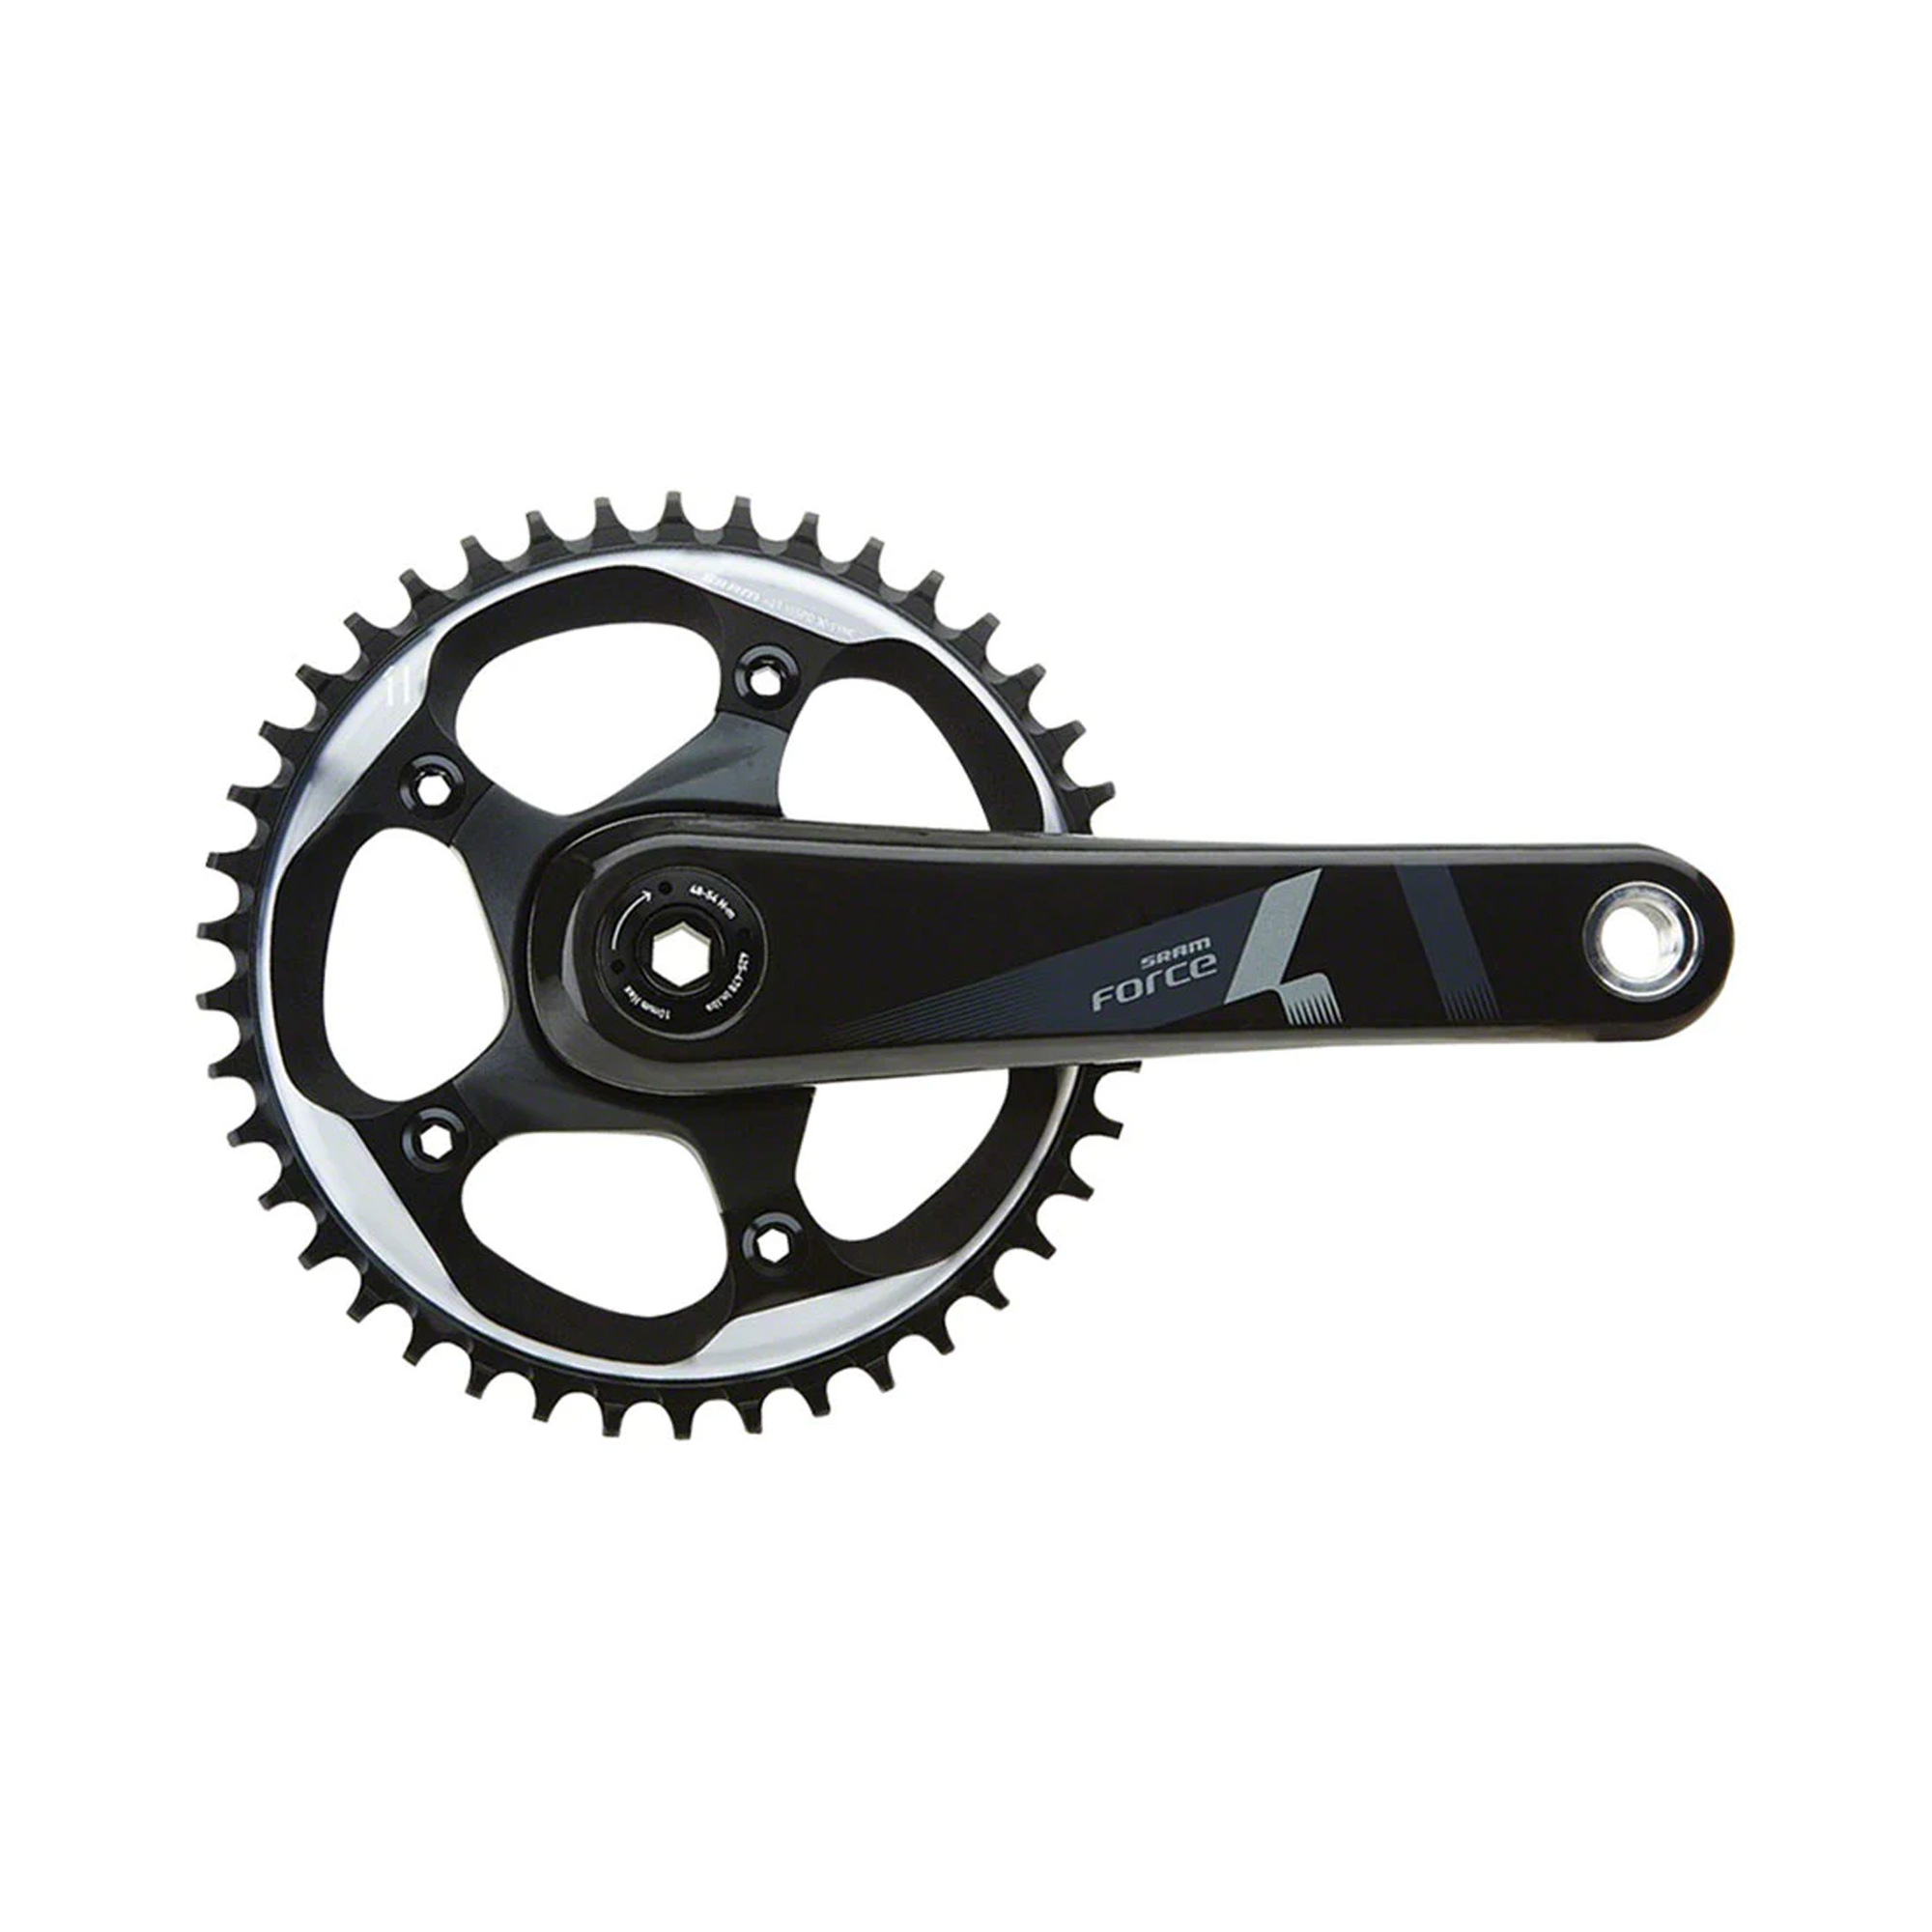 SRAM Force 1 Crankset - 172.5mm, 10/11-Speed, 42t, 110 BCD, BB30/PF30 Spindle Interface, Black